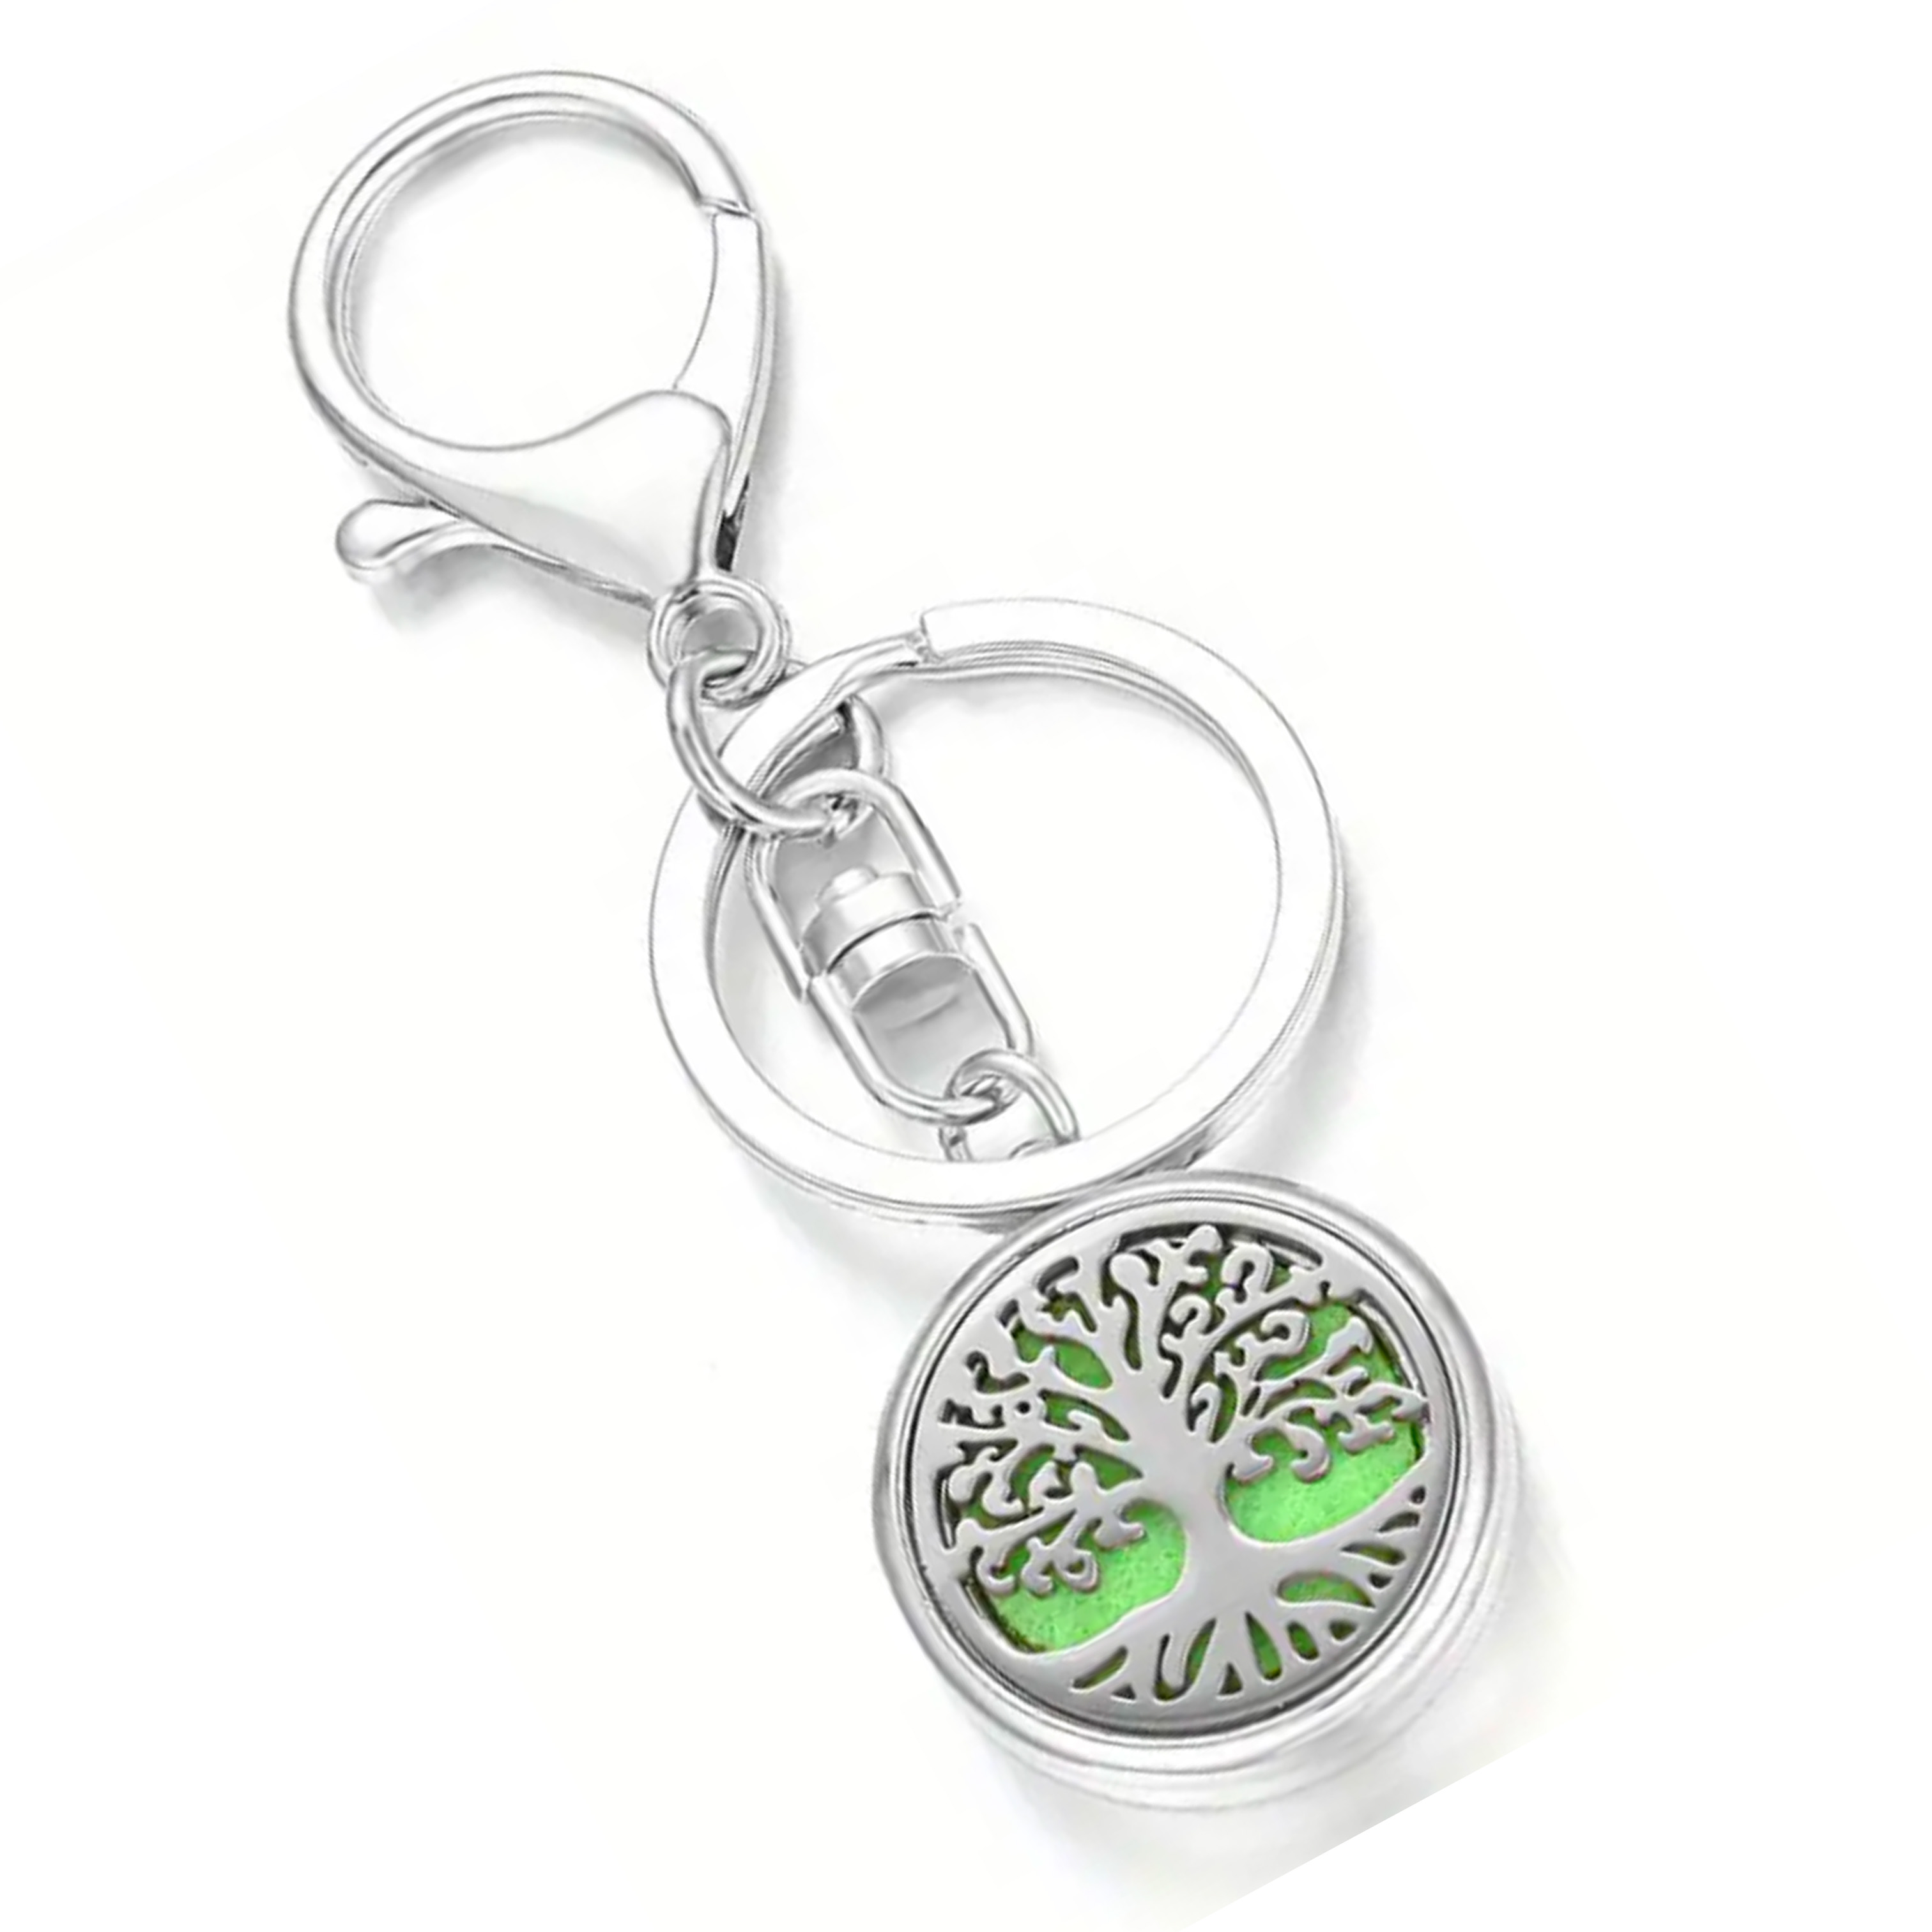 DIFFUSER KEYCHAIN - ROOTED TREE OF LIFE (Reg $13)